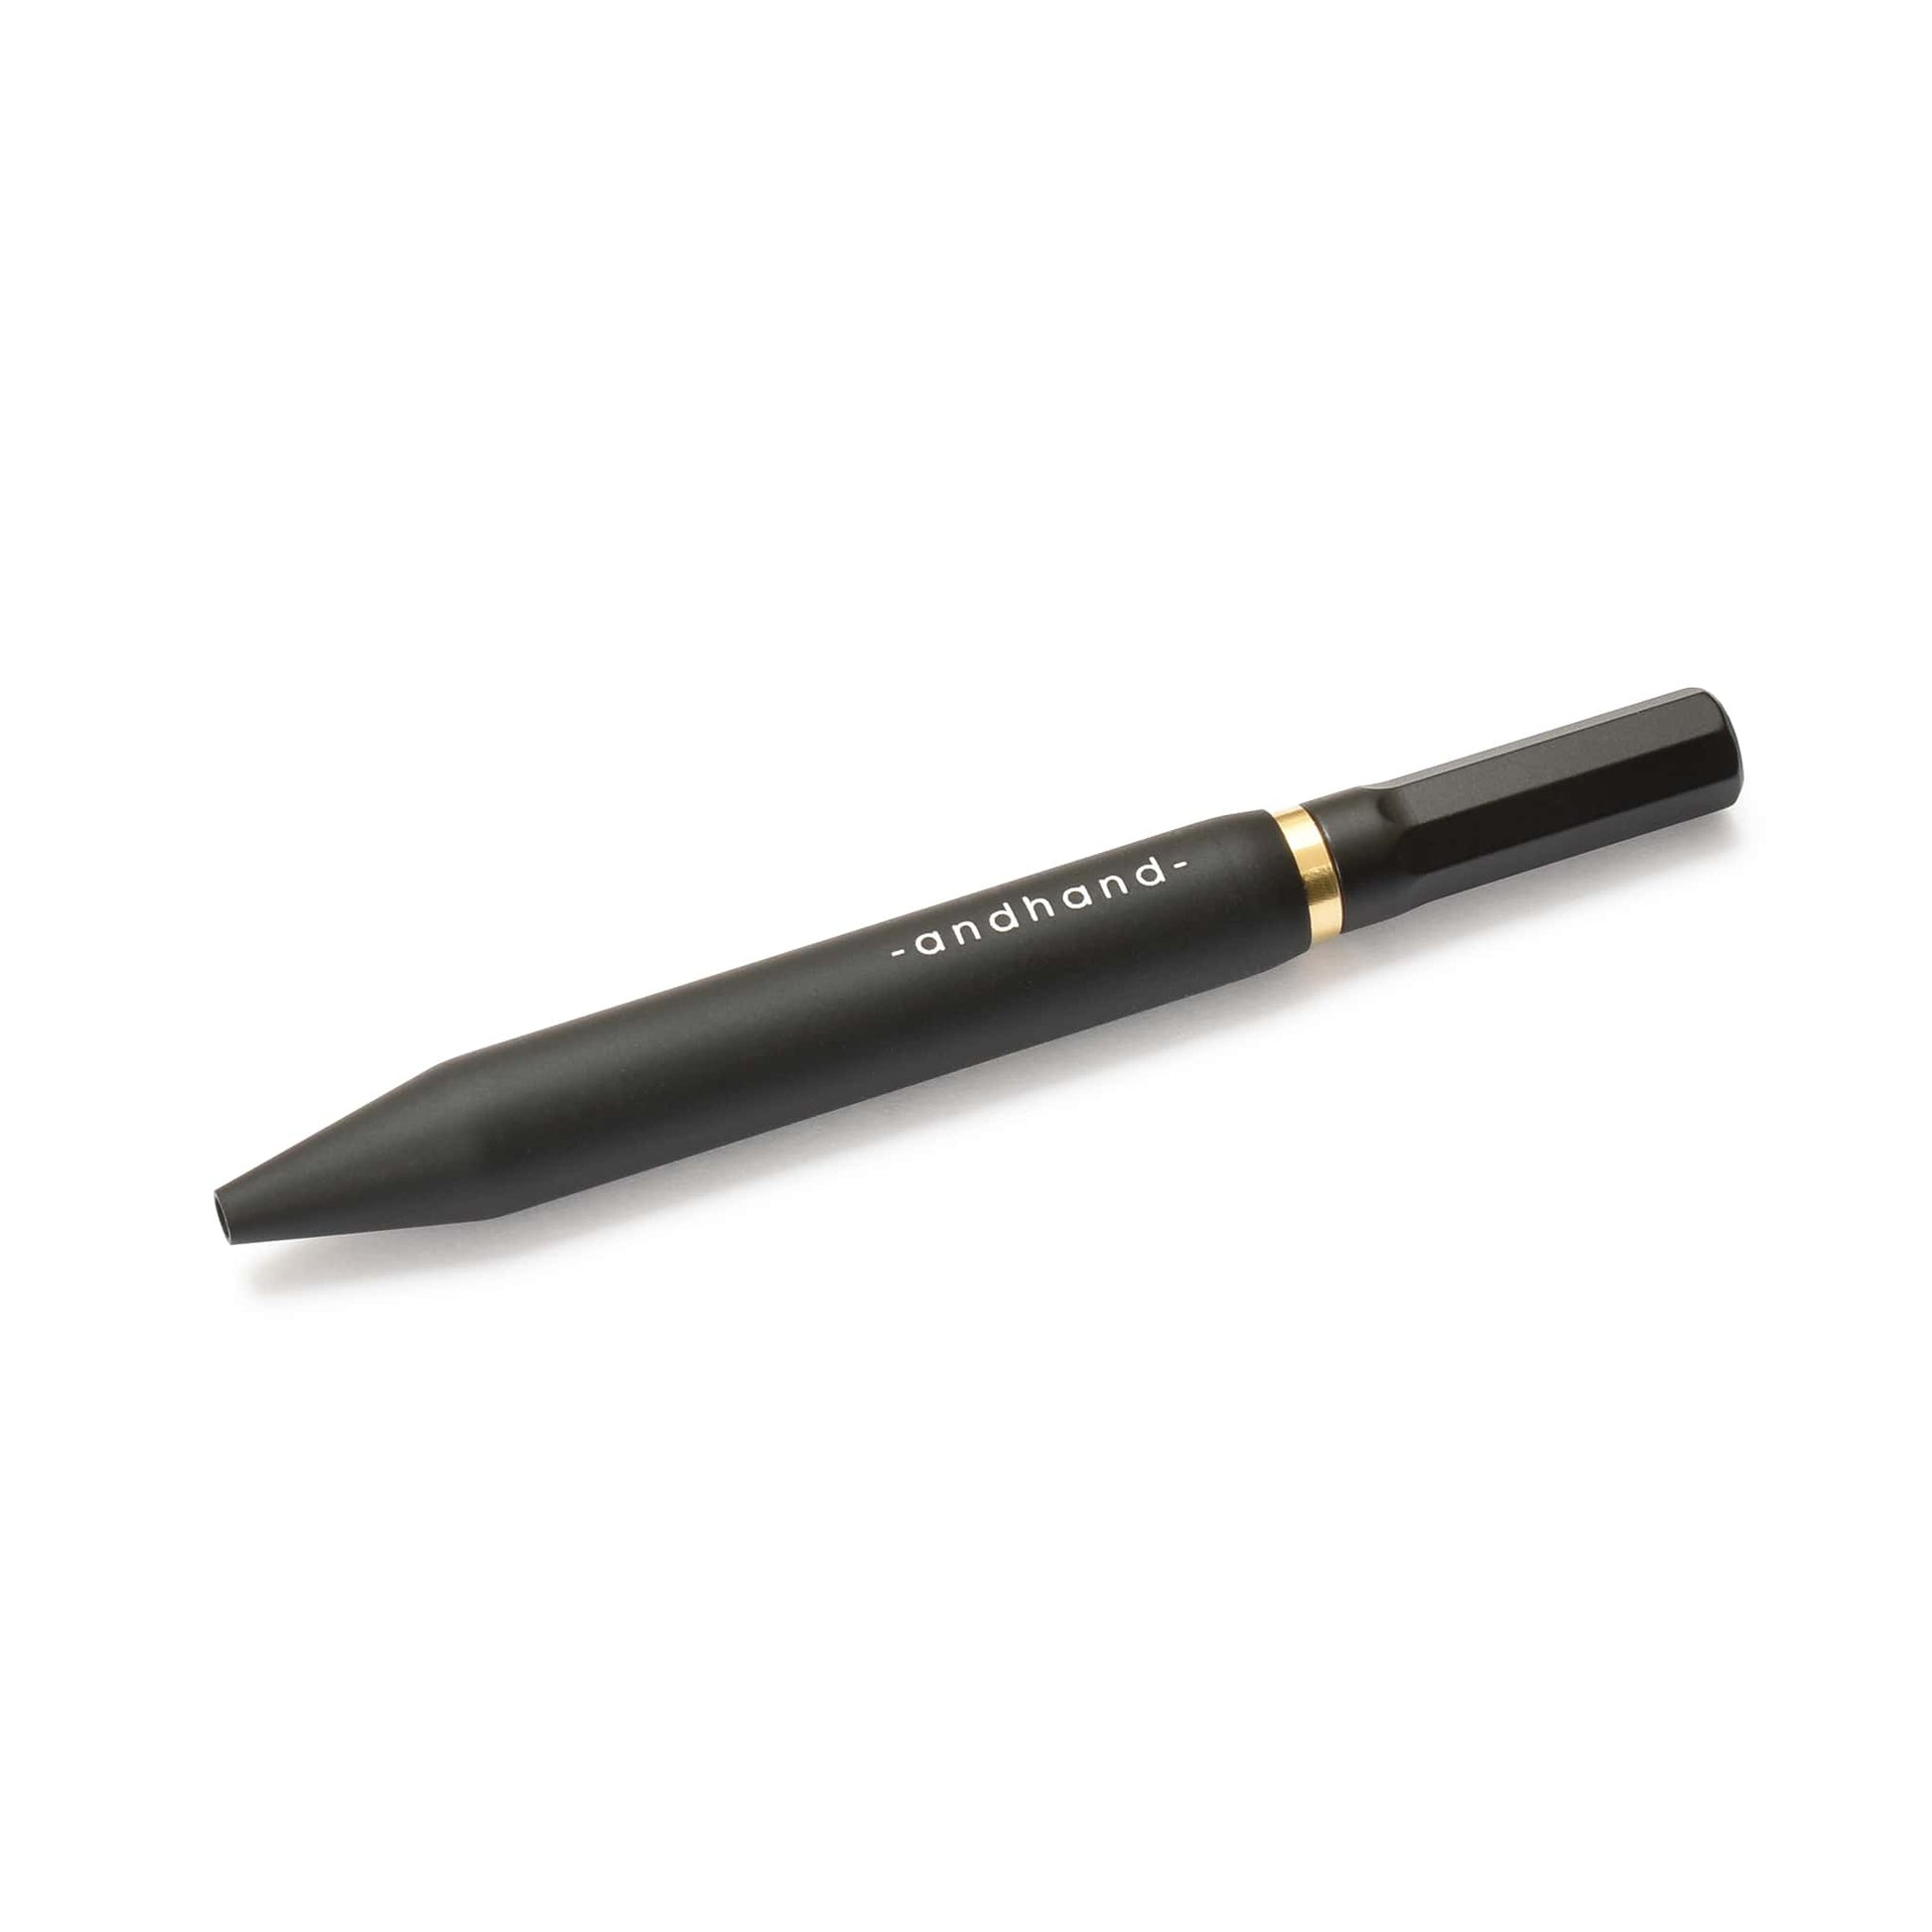 Aluminium and brass everyday carry black pen from Andhand. An expert compact writing tool with a smooth mechanism and modern minimal design. Amazingly durable and refined 4 inch pen Shown here in black satin anodized finish.